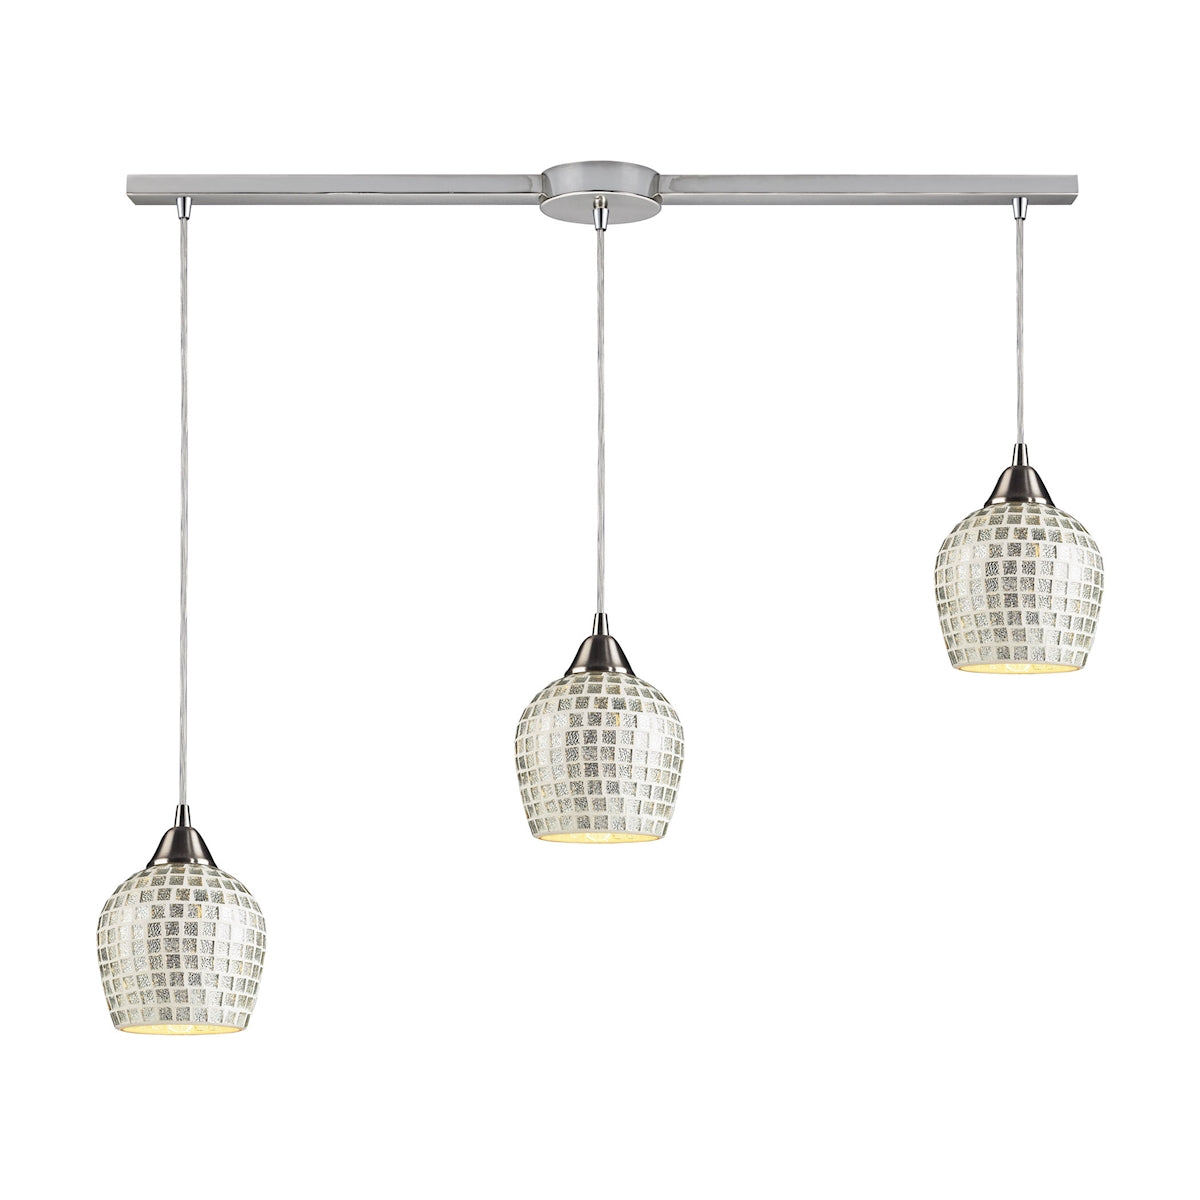 ELK Lighting 528-3L-SLV Fusion 3-Light Linear Pendant Fixture in Satin Nickel with Silver Mosaic Glass